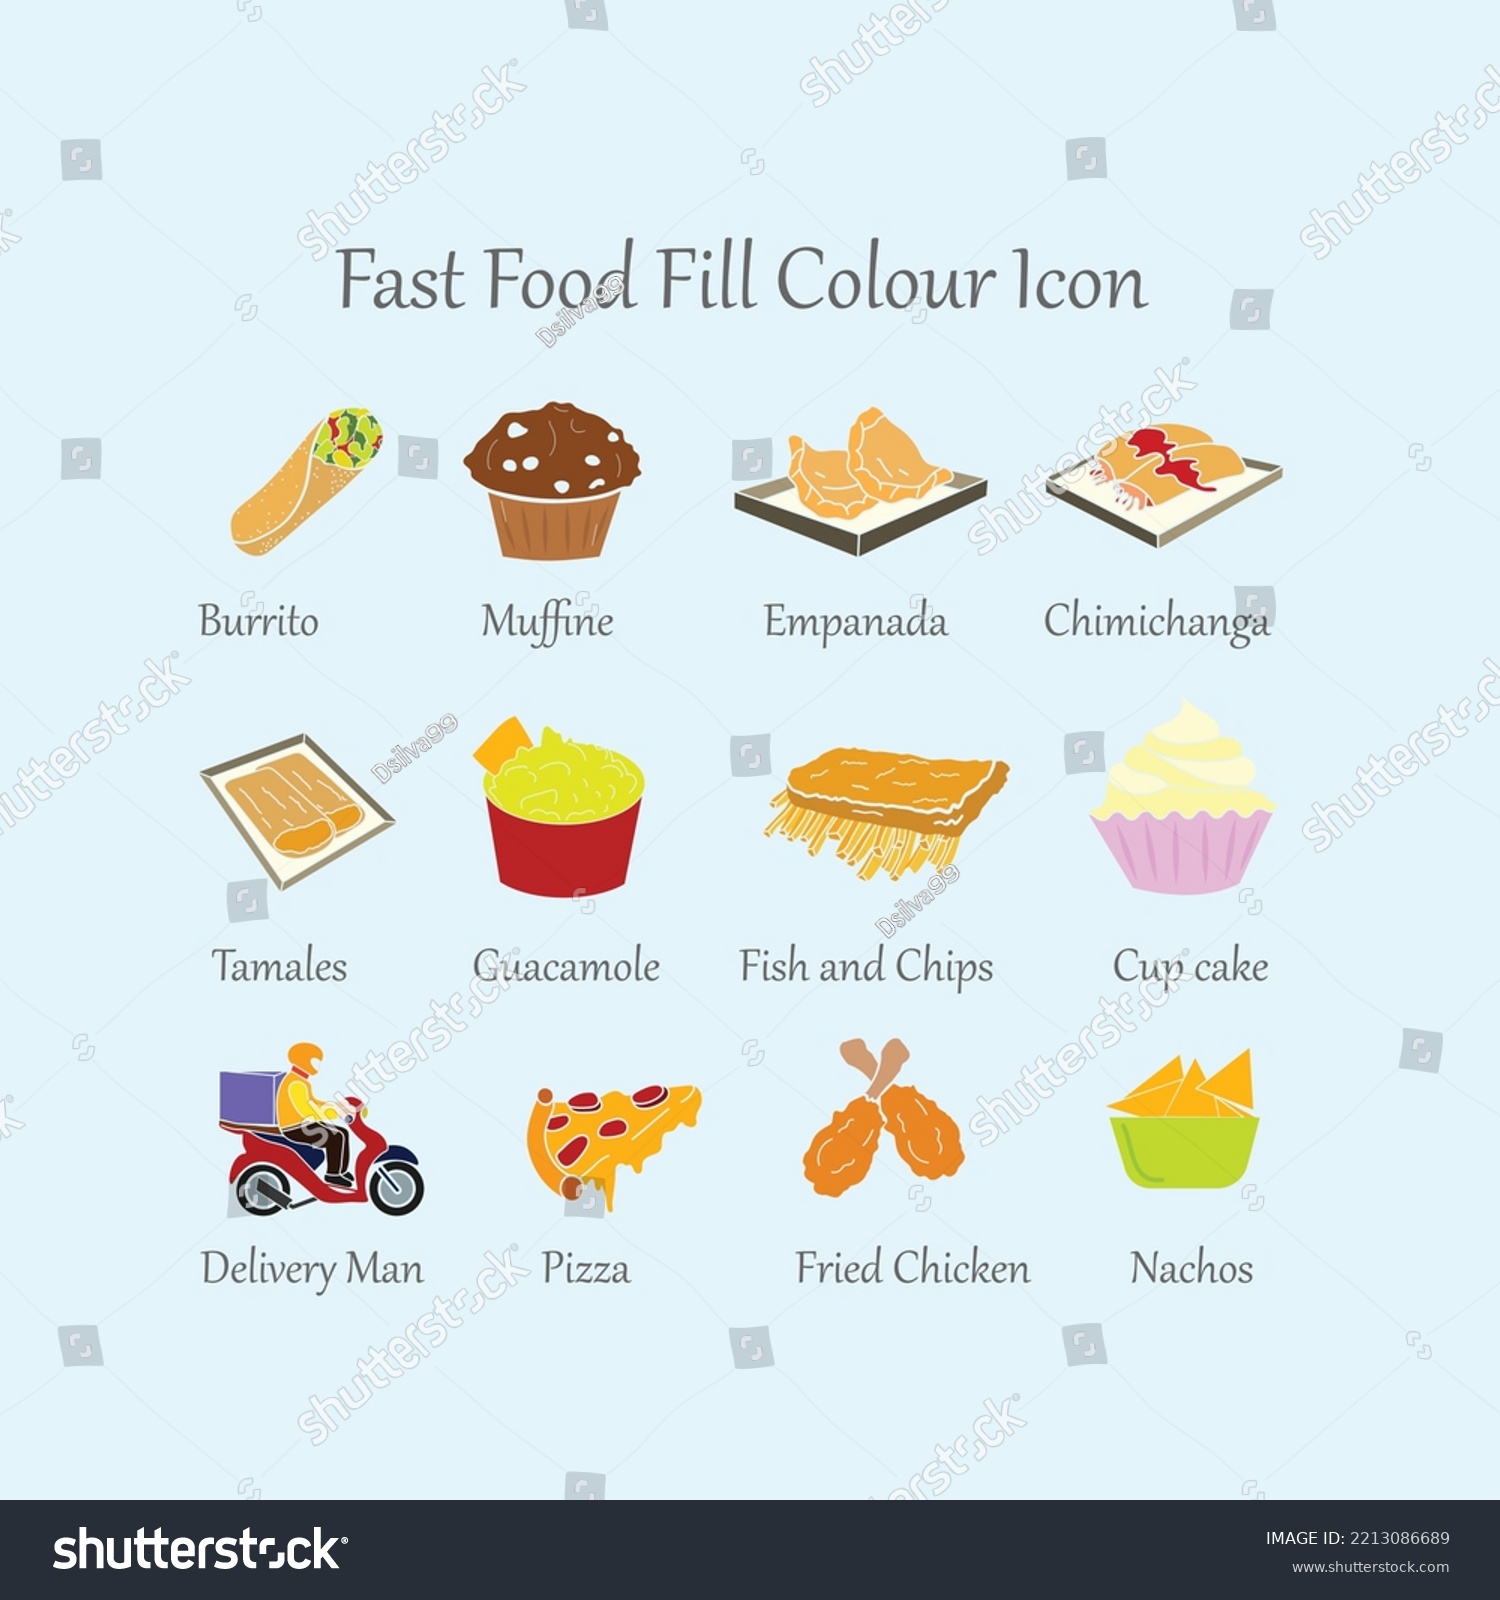 SVG of Burrito, Muffin, Empanada, Chimichanga, Tamales, Guacamole, fish and Chips, Cup cake, Delivery Man, Pizza, Fried Chicken, Nachos Fast food Fill Color isolated icon and set svg